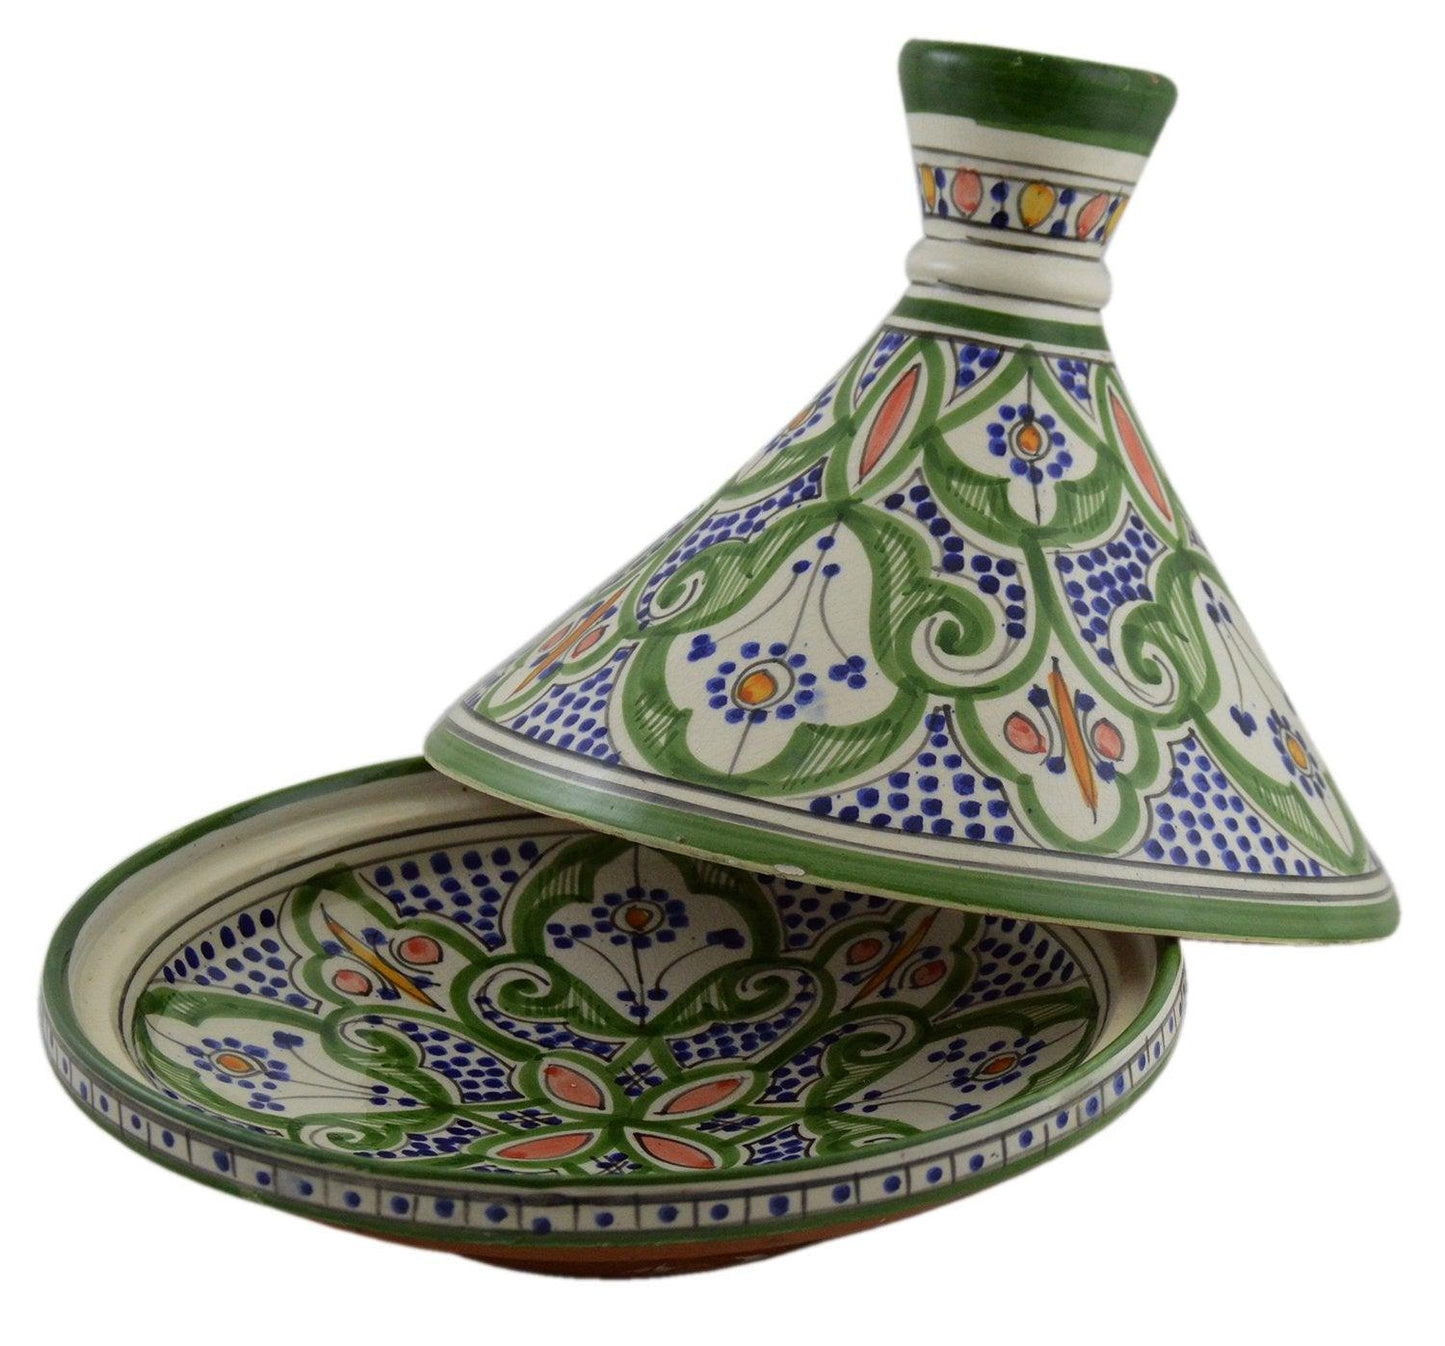 Moroccan Handmade Serving Tagine Exquisite Ceramic With Vivid Colors Traditional 12 inches Across XLarge - CookCave